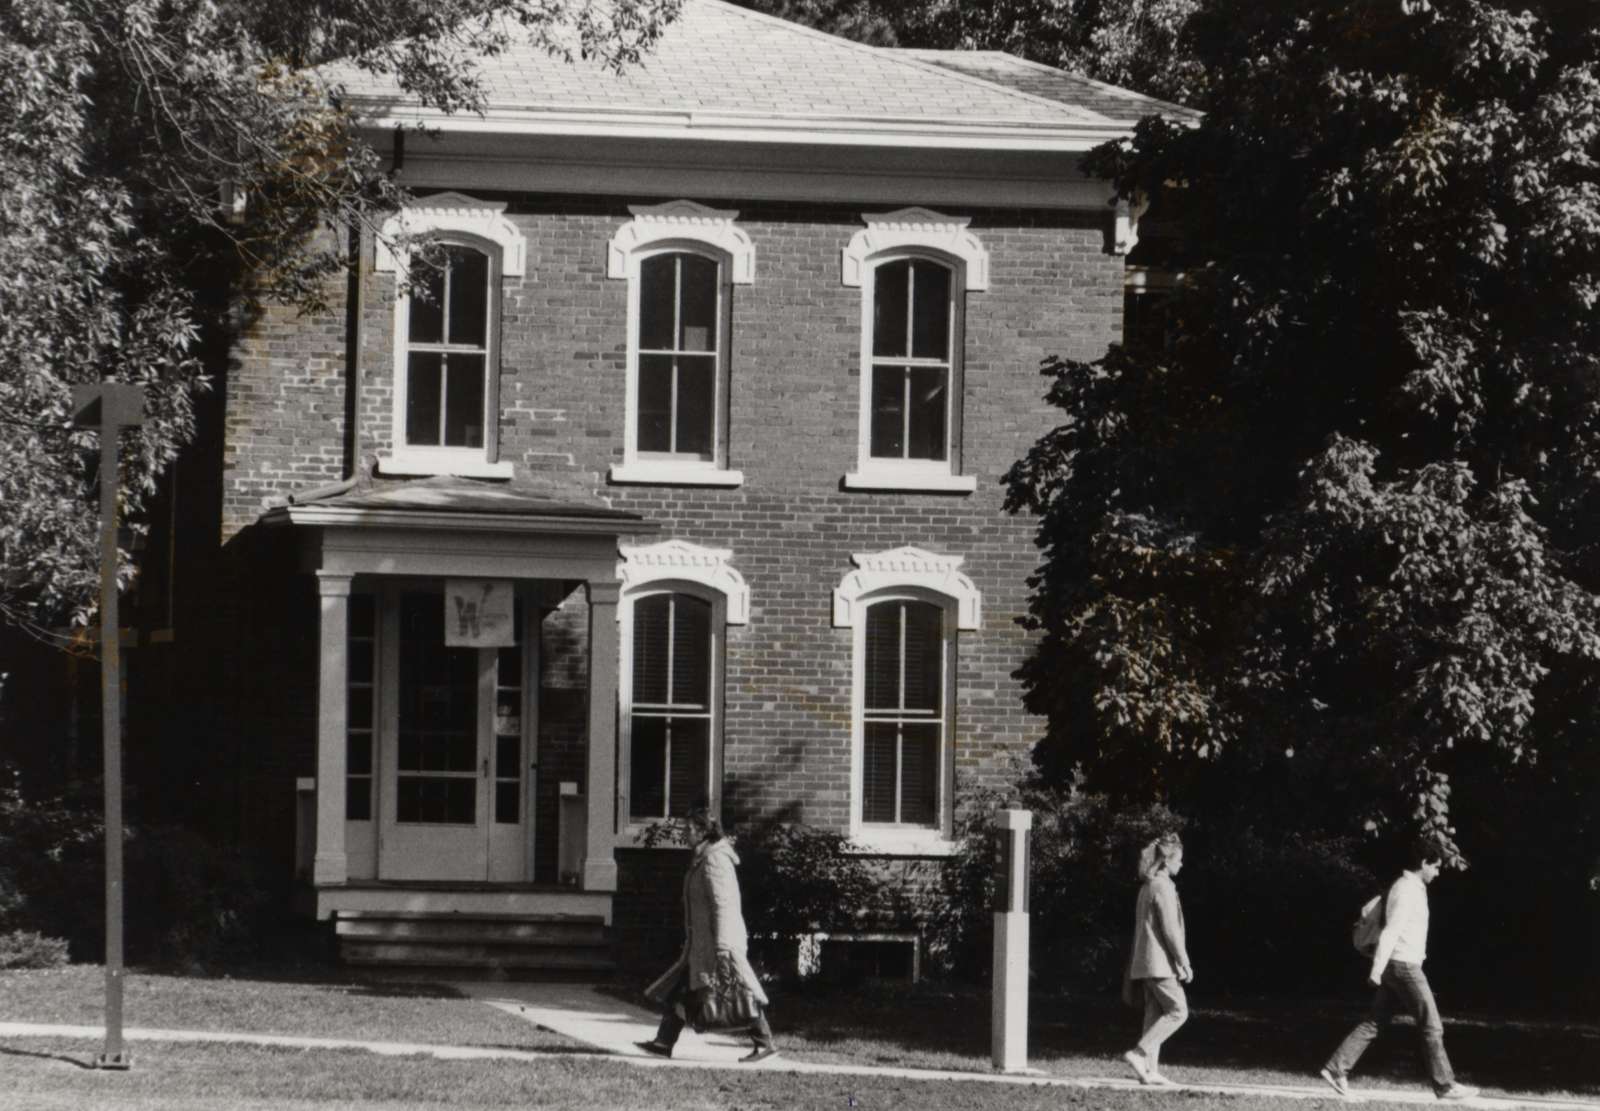 Photograph of the Sloss House, home to the Sloss Women's Center since 1981